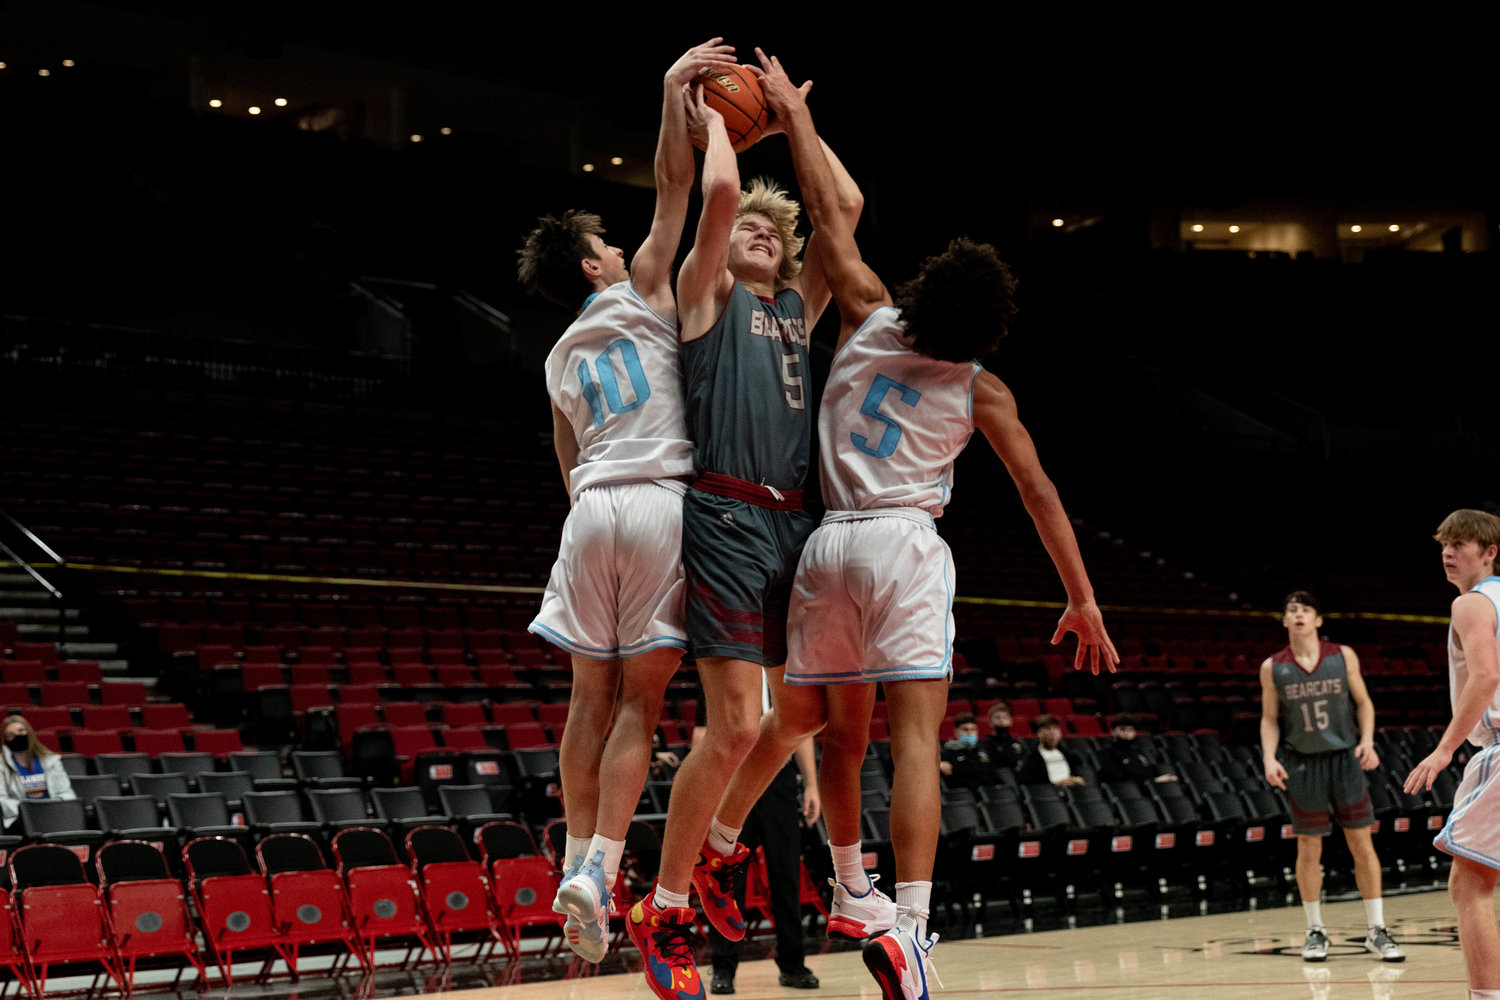 W.F. West's Dirk Plakinger is blocked attempting a jump shot against Mark Morris at the Moda Center in Portland Dec. 11.